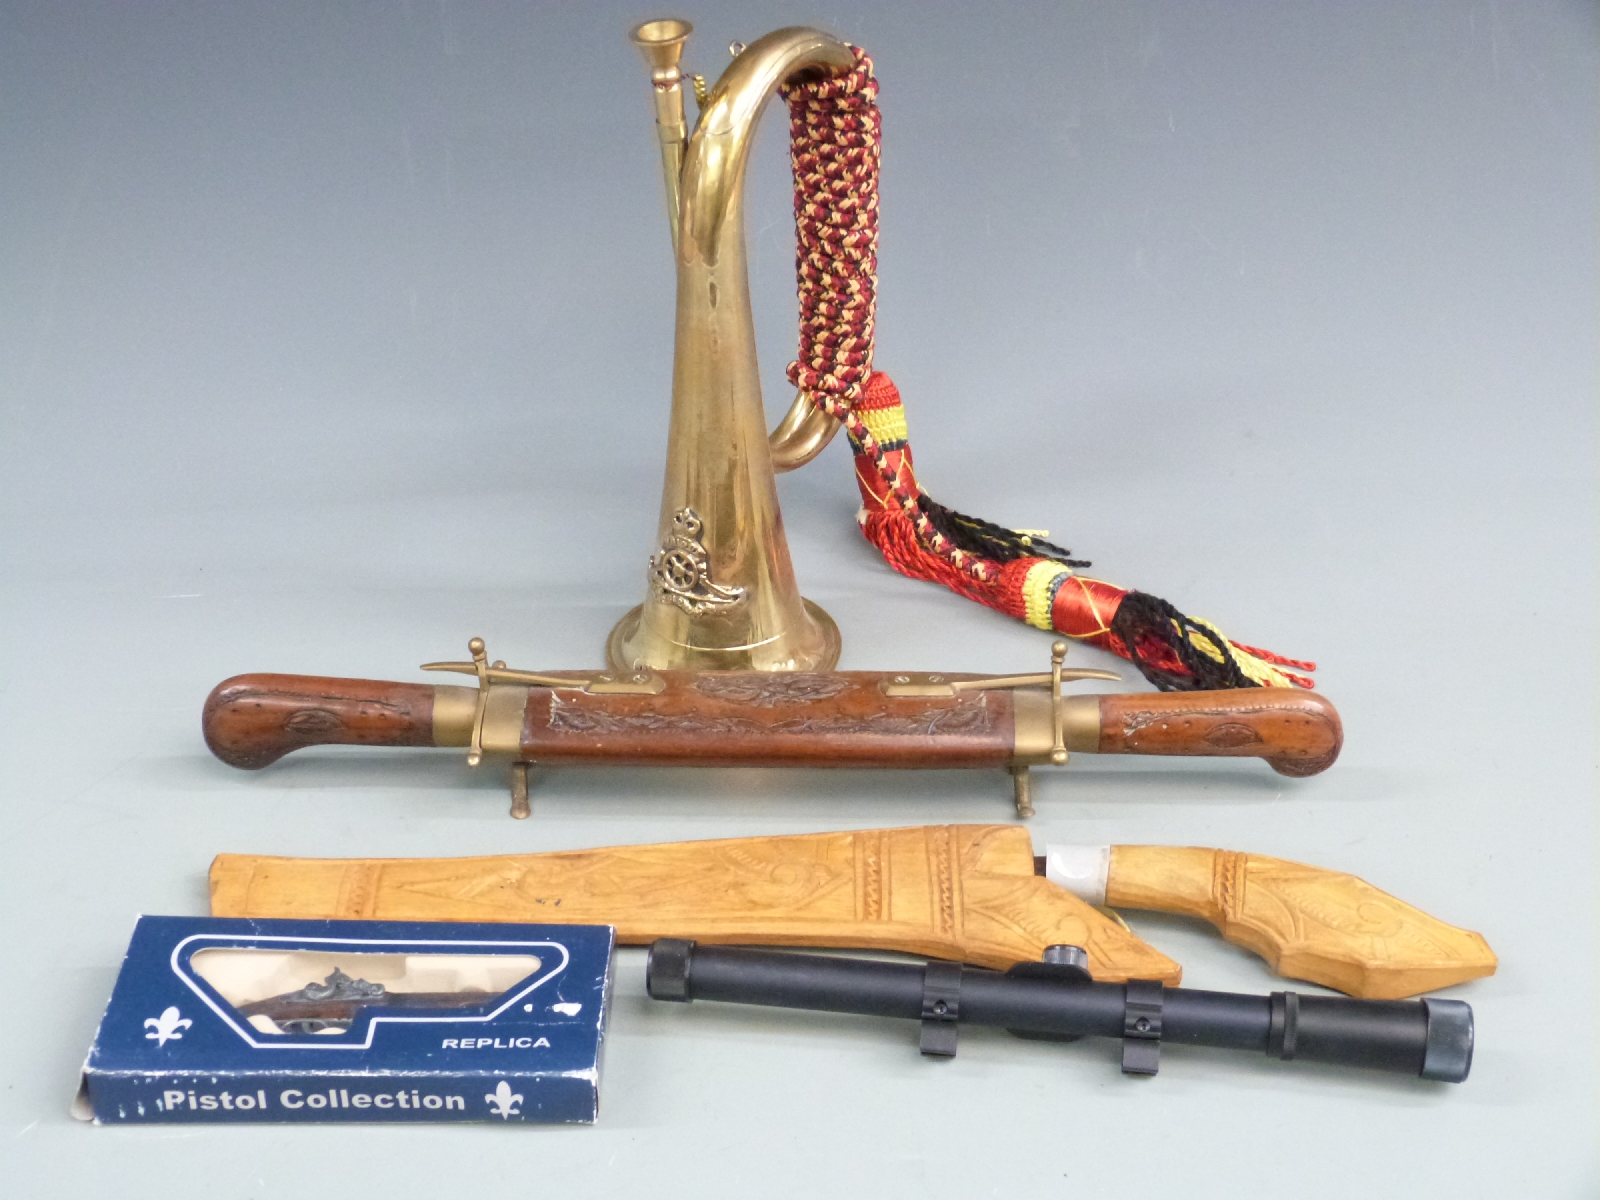 Rifle scope, military bugle, knives, Indian carving set etc